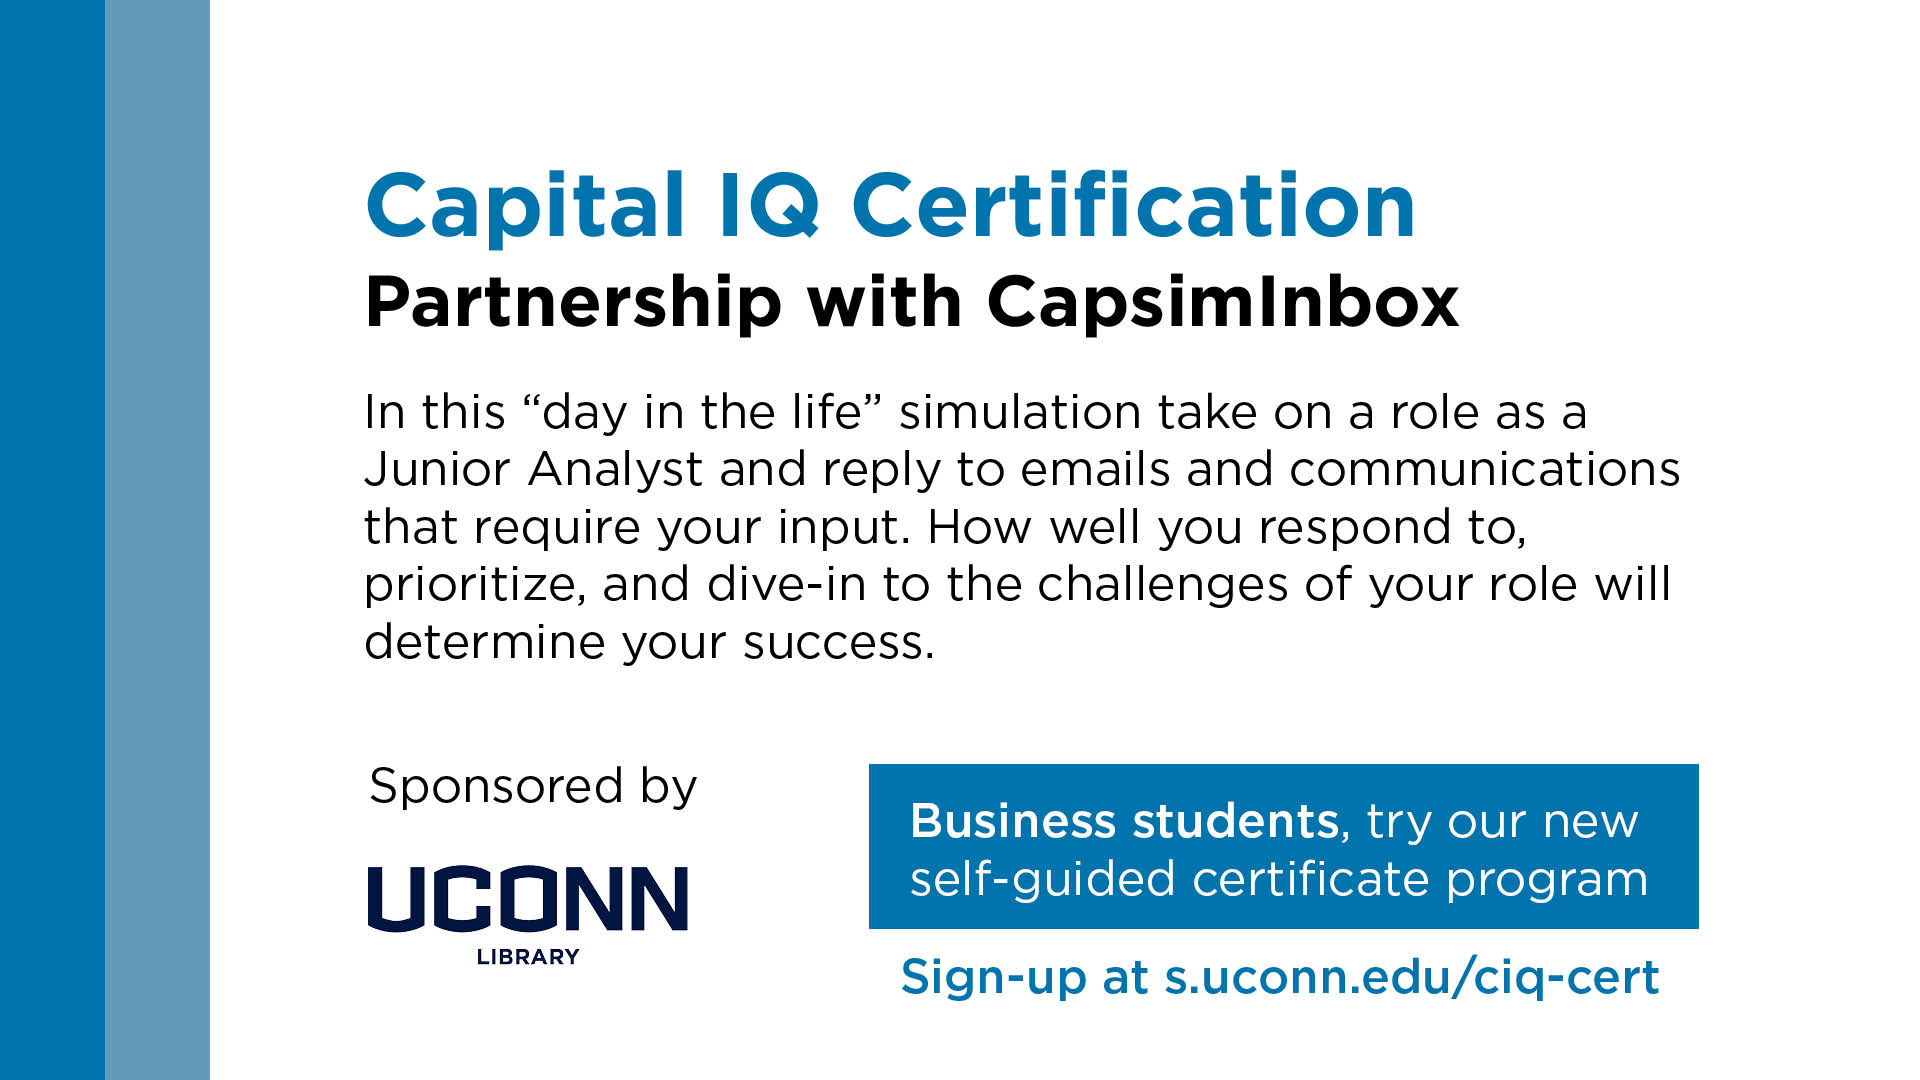 Capital IQ Certification in partnership with CapsimInbox. In this 'day in the life' simulation take on a role as a Junior Analyst and reply to emails and communications that require your input. How well you respond to, prioritize, and dive-in to the challenges of your role will determine your success. Sponsored by the UConn Library. Sign up at s.uconn.edu/ciq-cert.